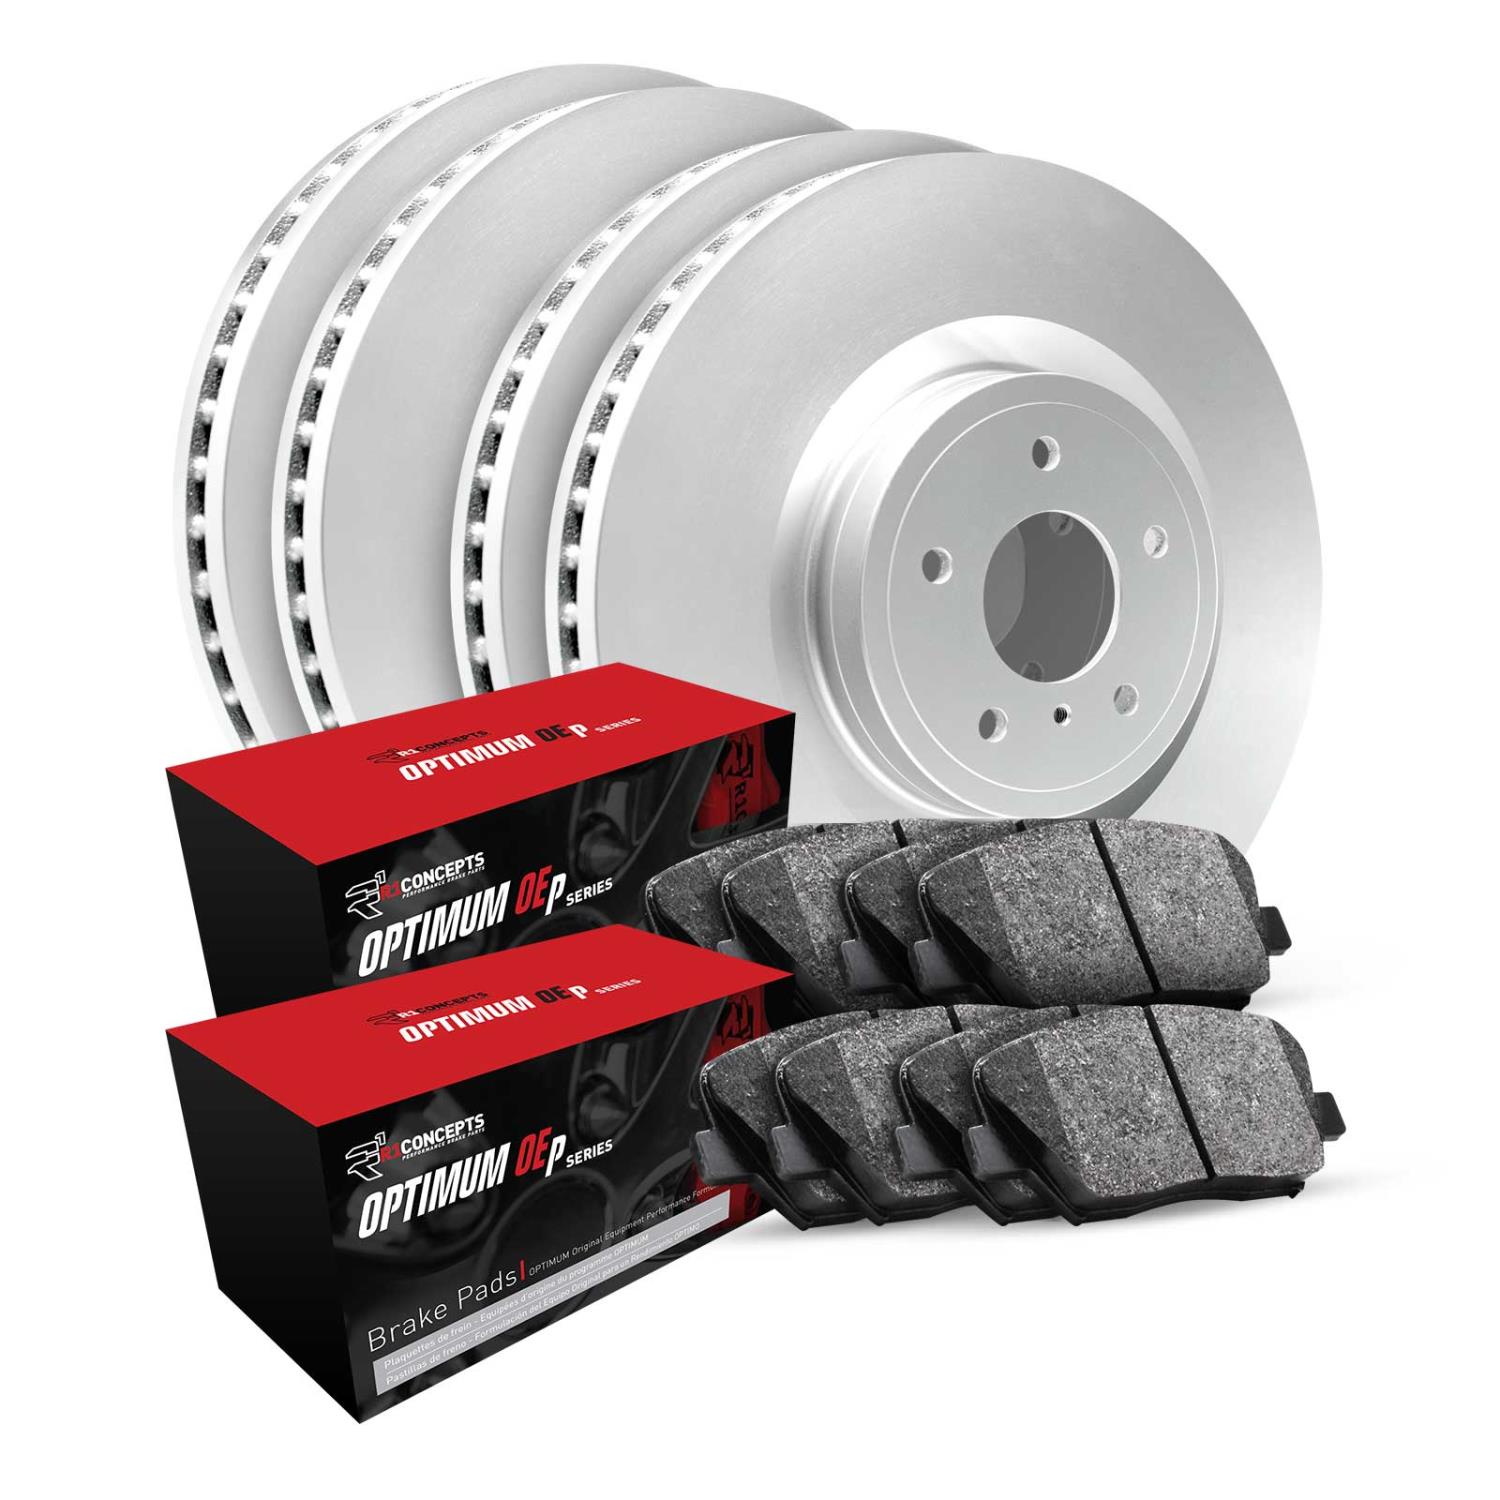 GEO-Carbon Brake Rotor Set w/Optimum OE Pads, 2007-2014 Fits Multiple Makes/Models, Position: Front & Rear